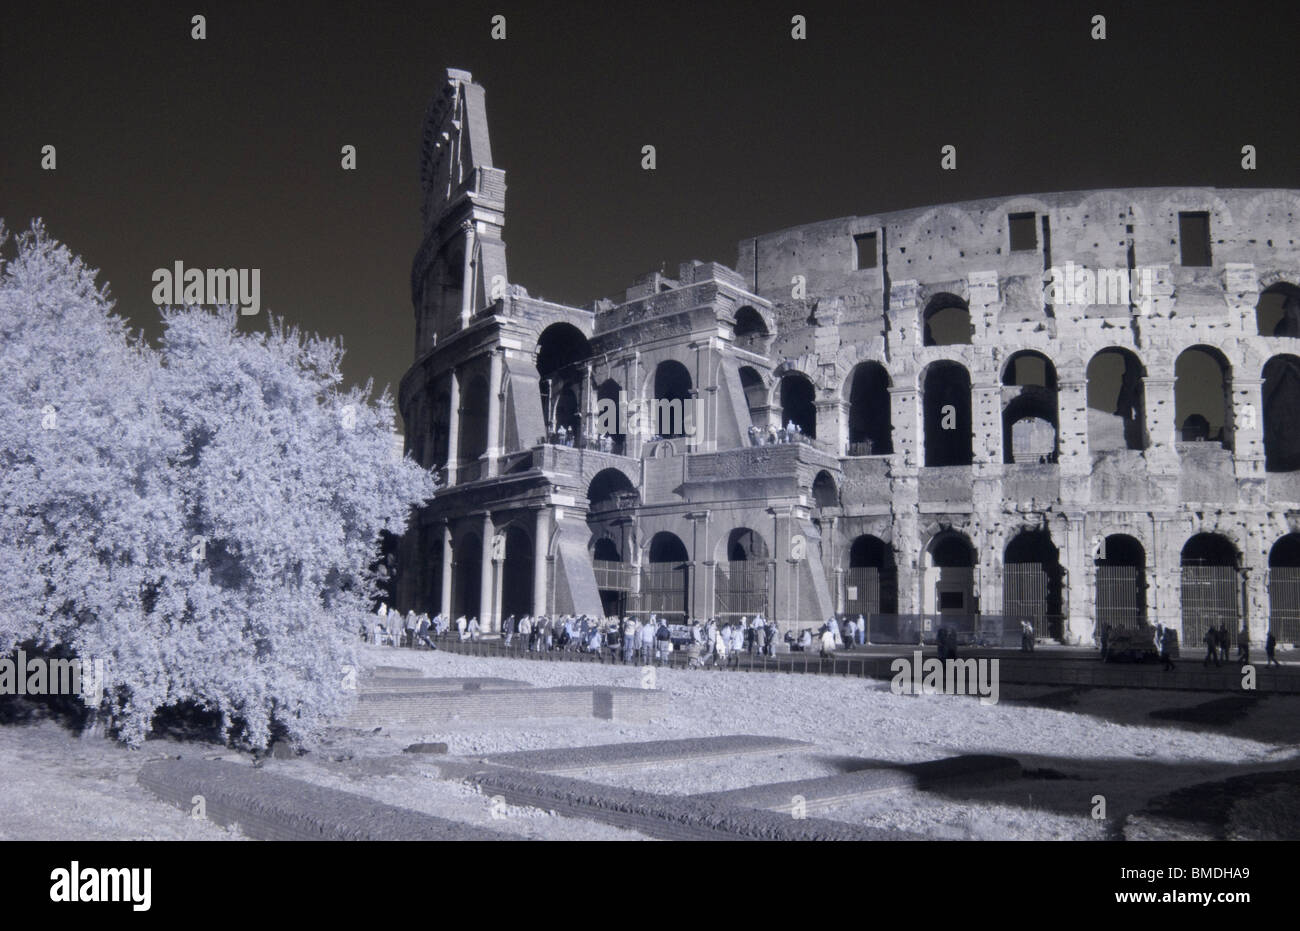 Infraed Black White image of Colosseum in Rome Italy Stock Photo